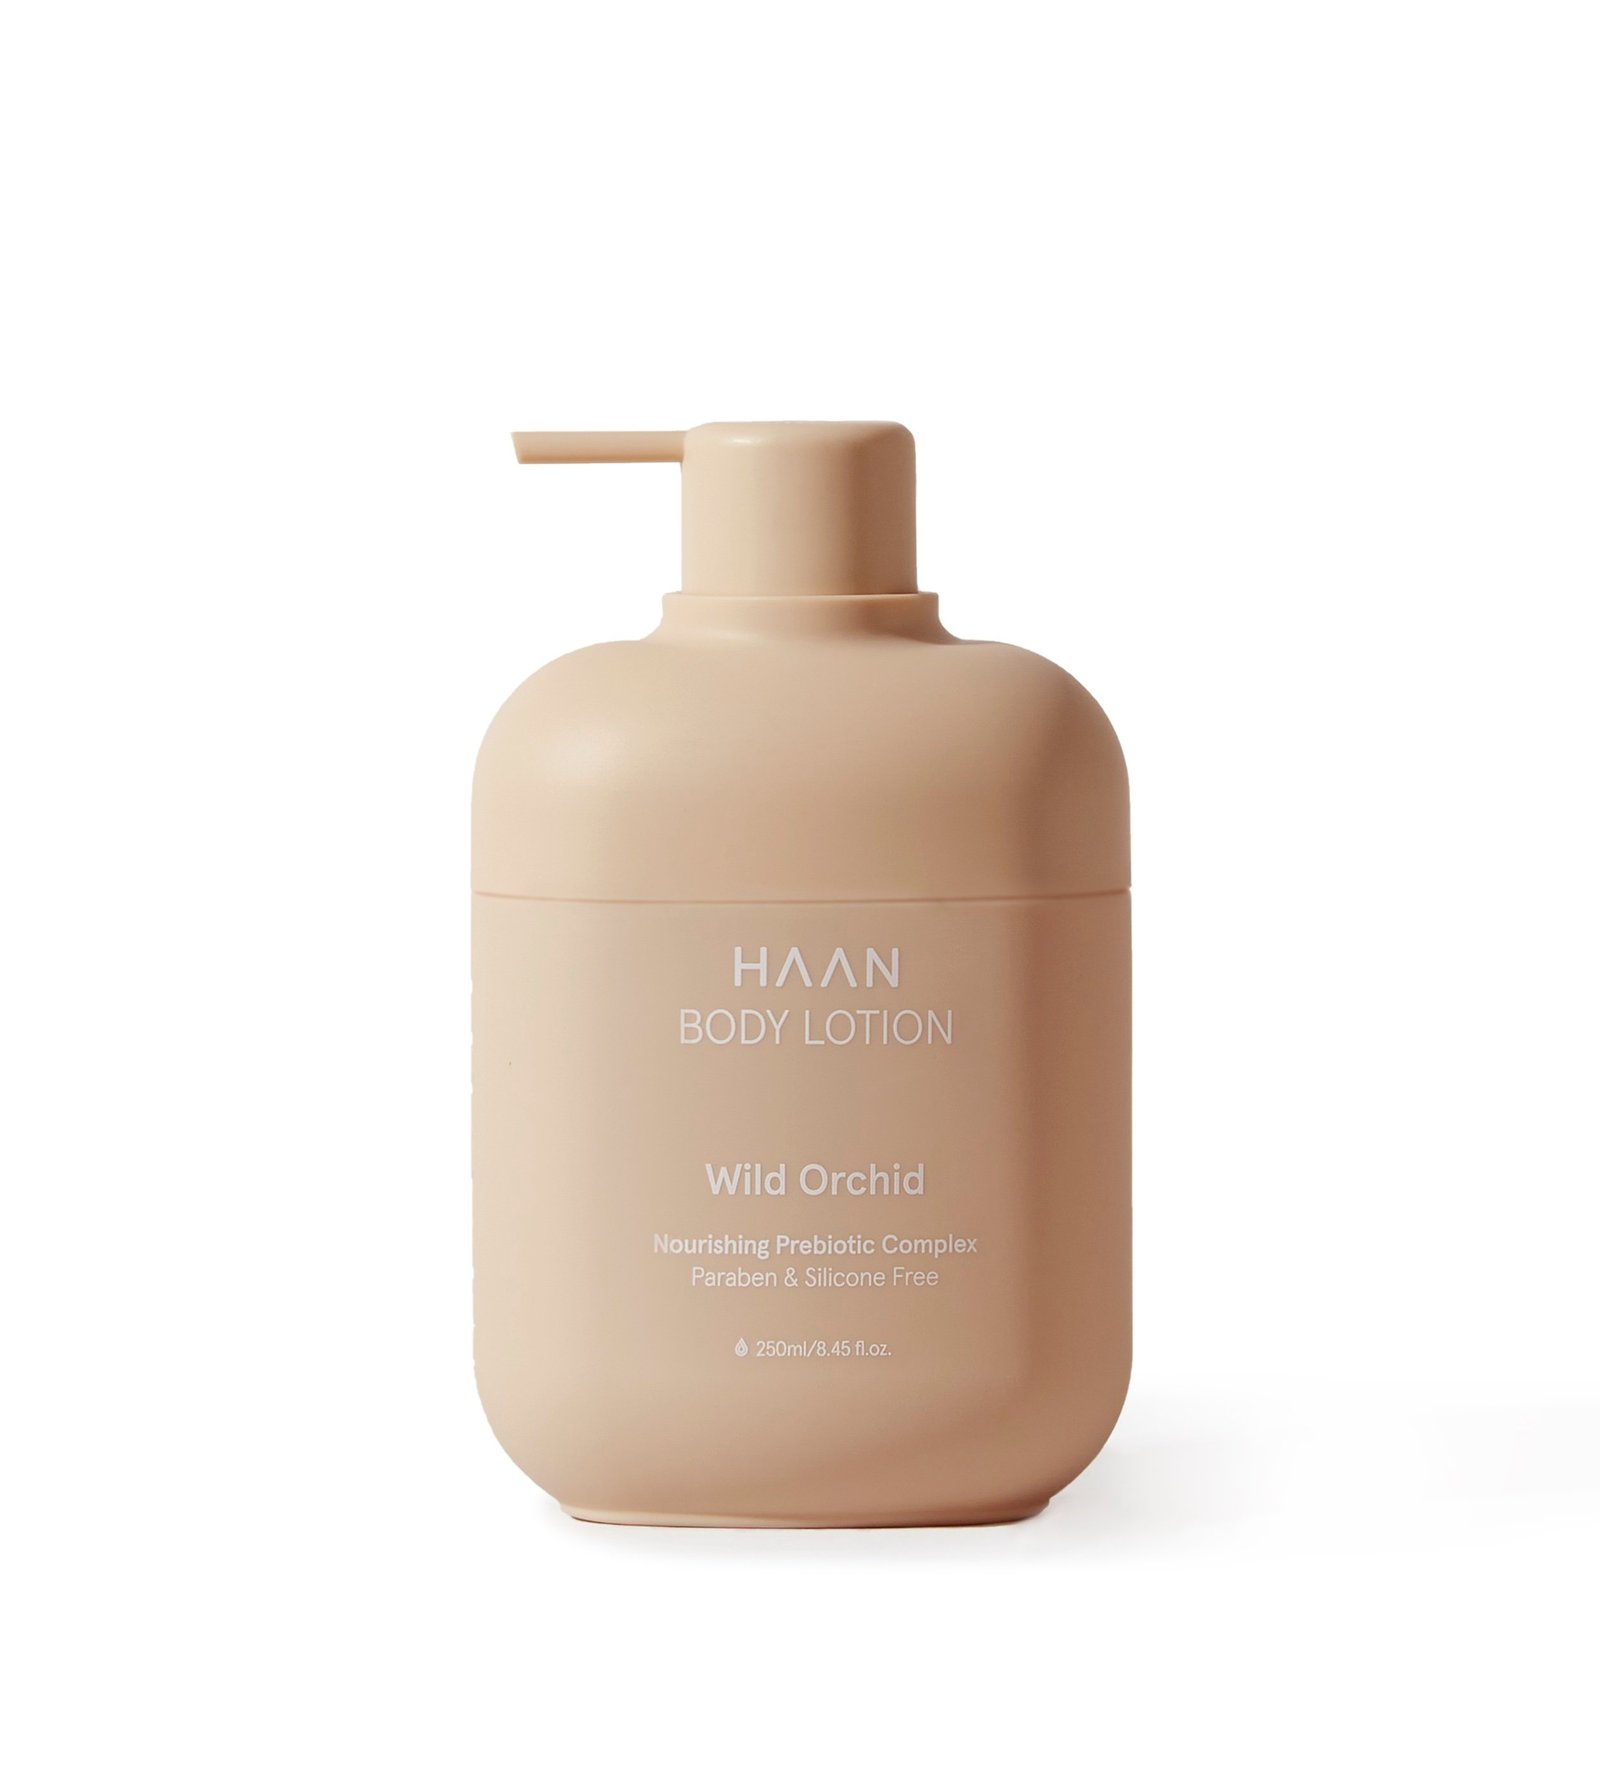 HAAN Body Lotion Wild Orchid Body Lotion 250 ml